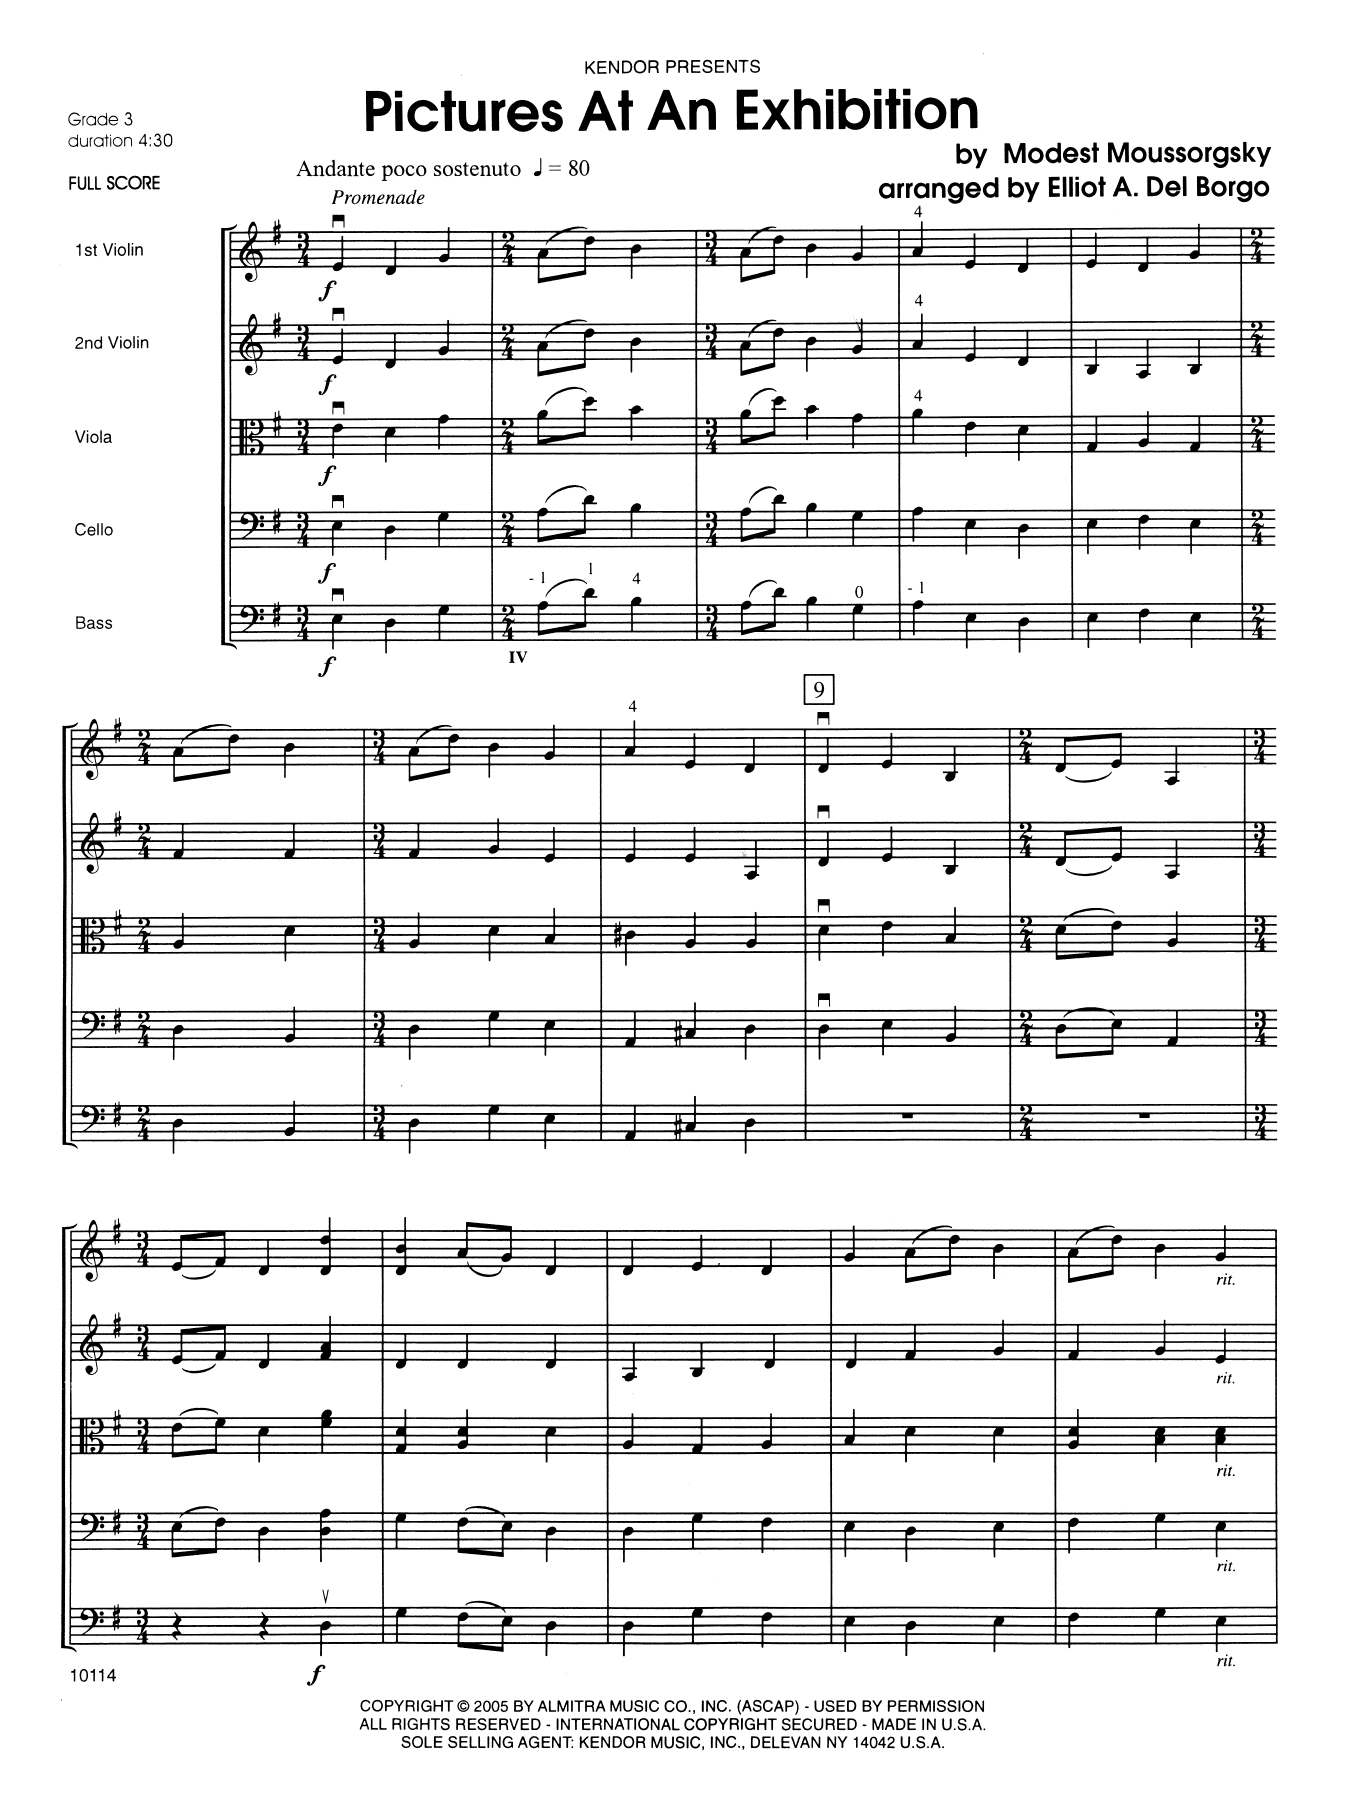 Modest Mussorgsky Pictures at an Exhibition - Full Score sheet music preview music notes and score for Orchestra including 14 page(s)